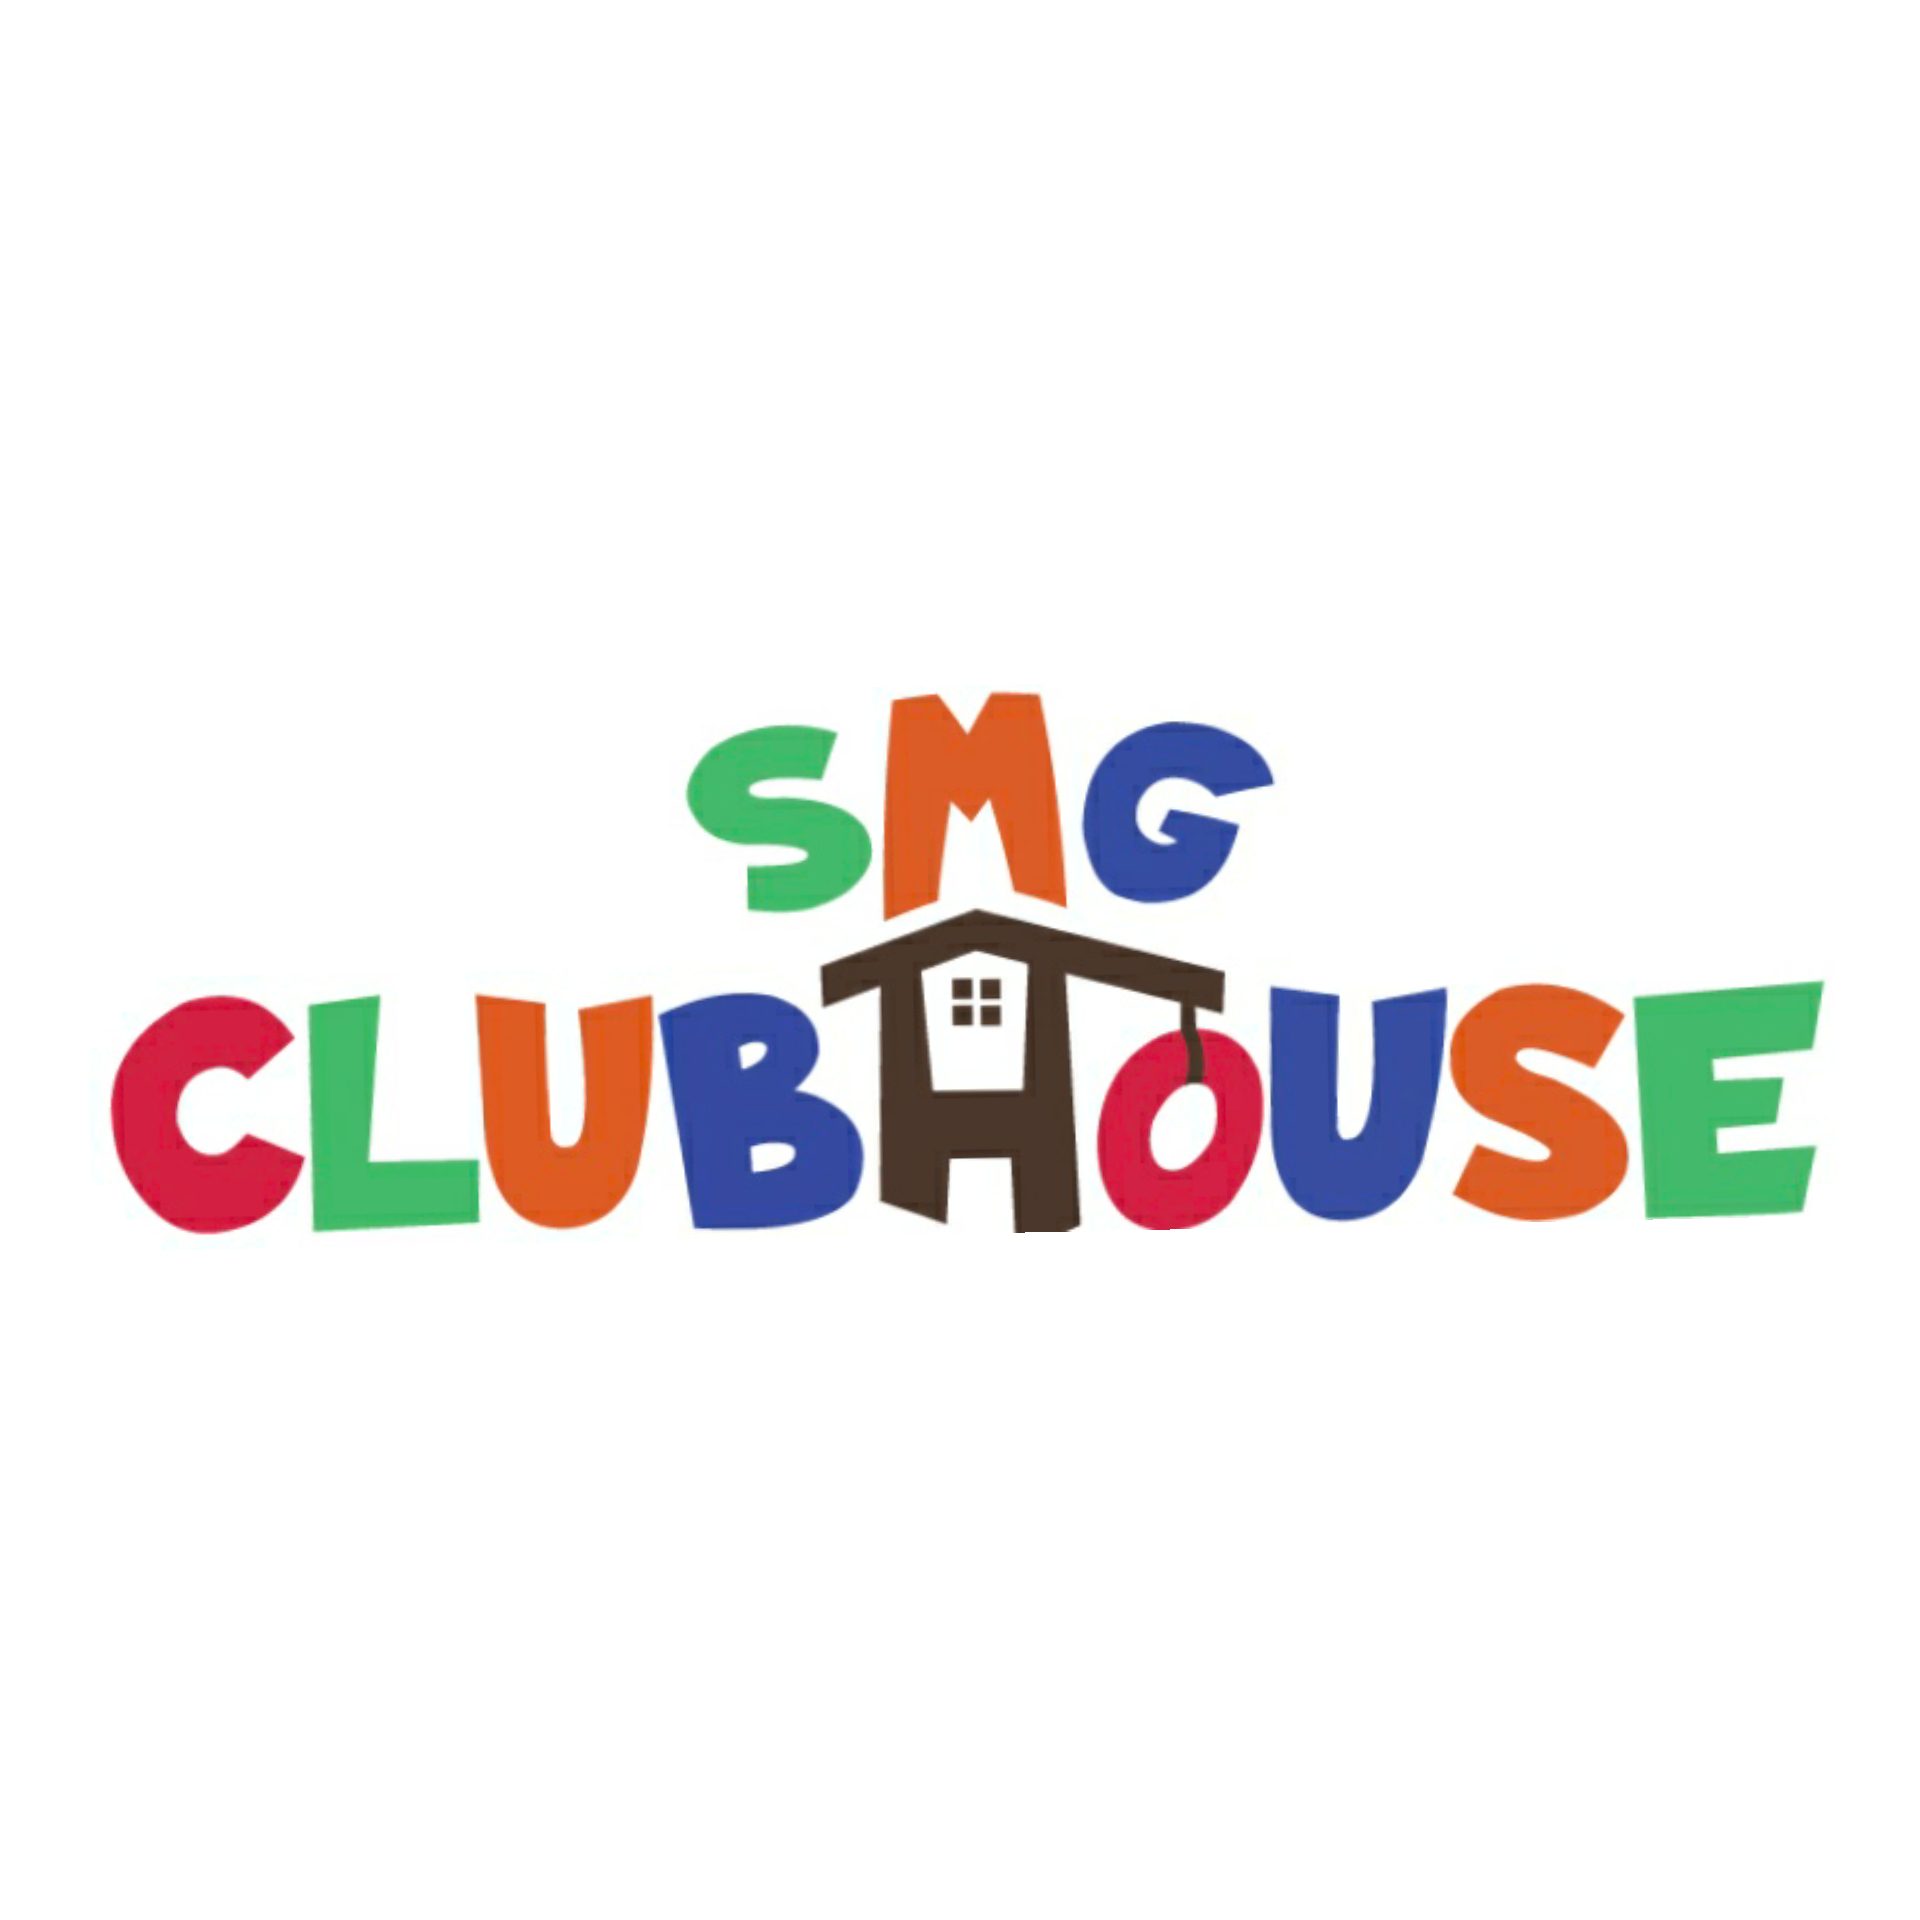 SMG CLUBHOUSE LLC